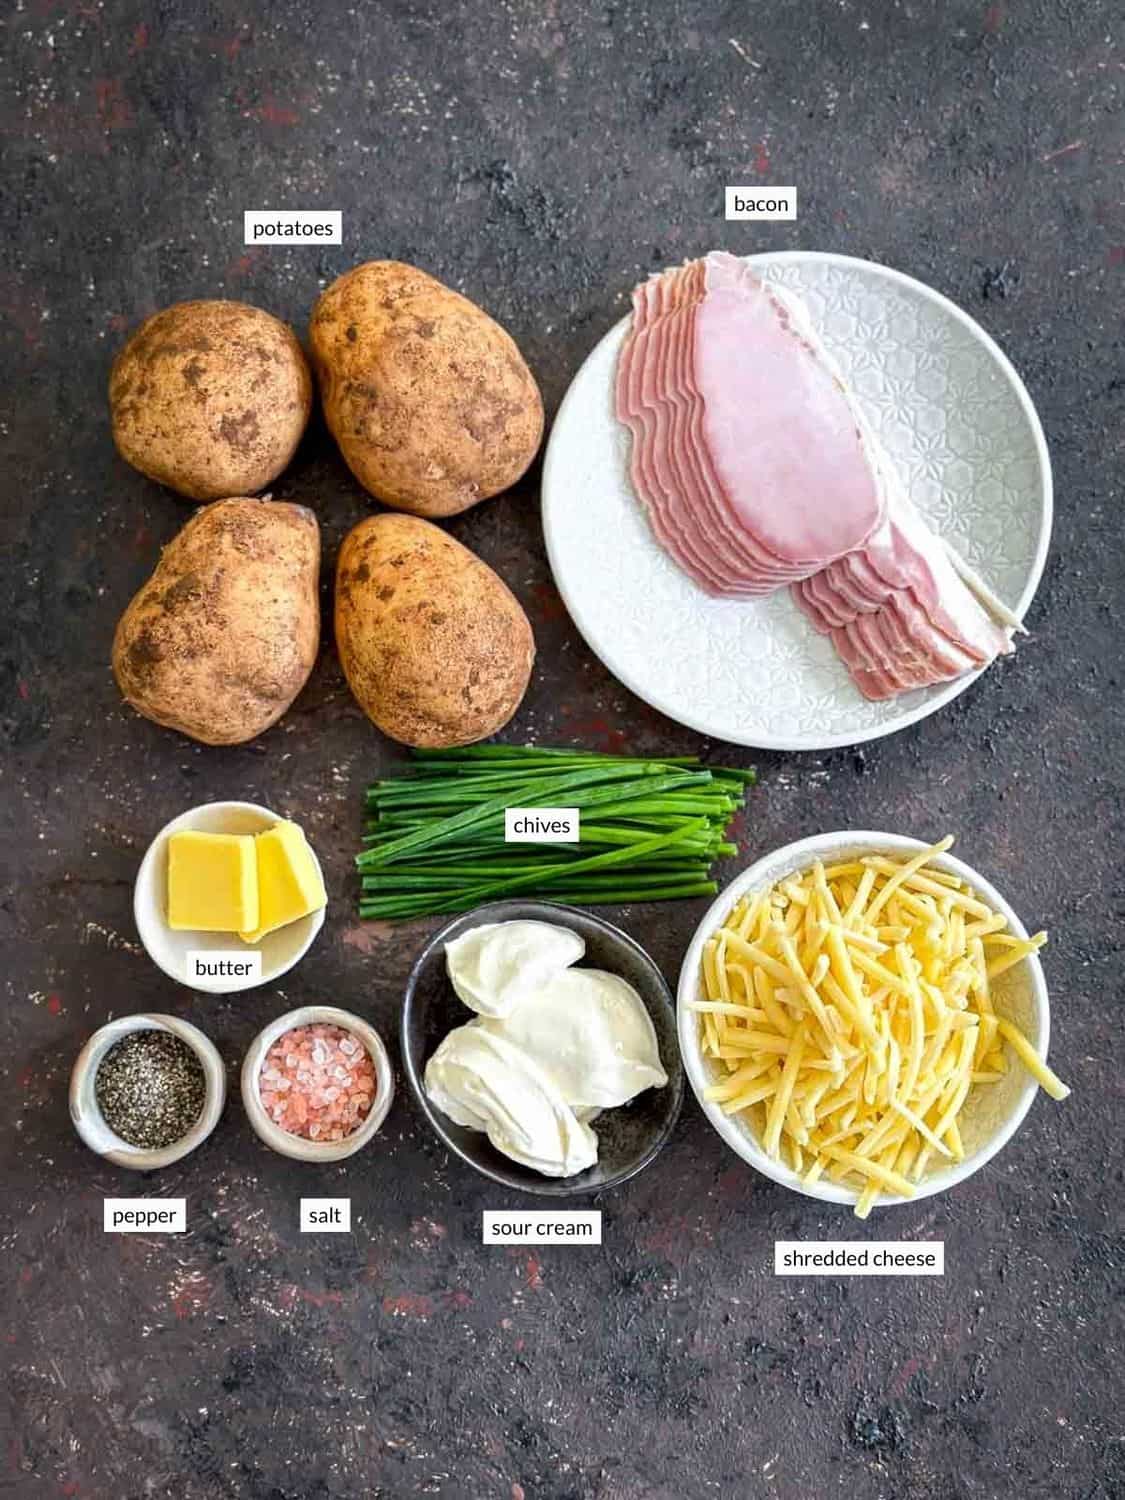 Individually labelled ingredients for twice baked mashed potatoes